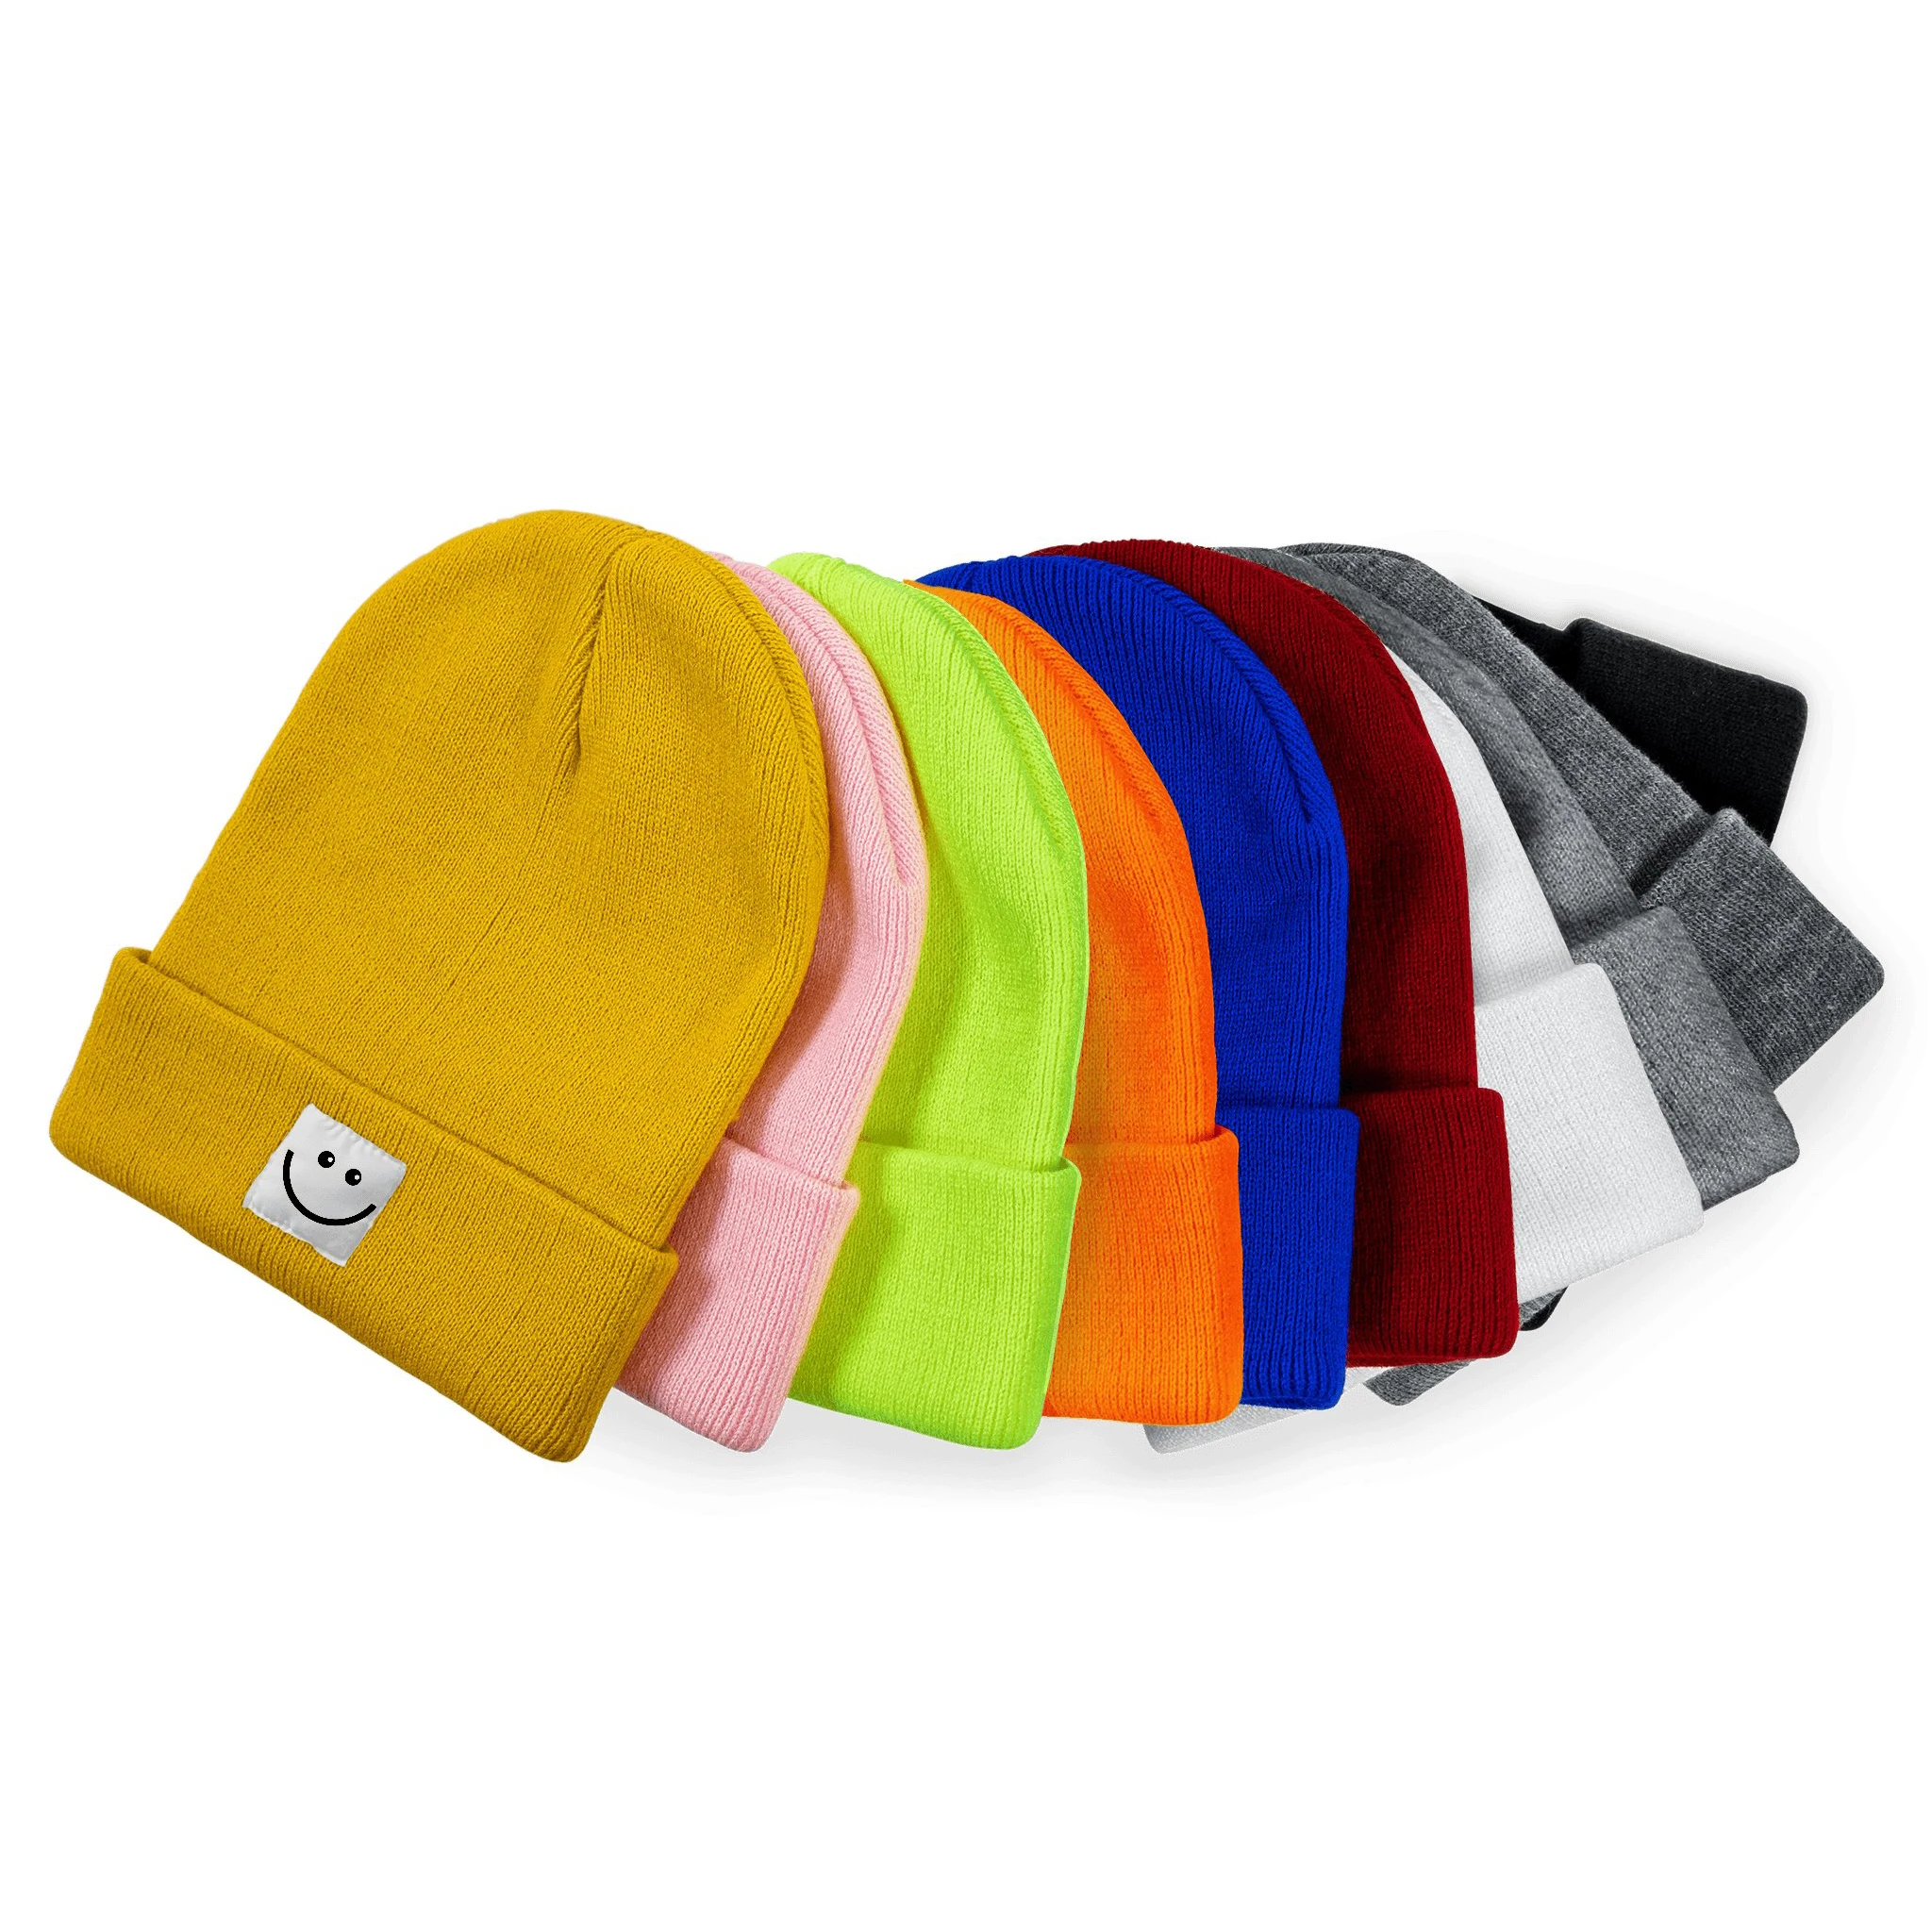 New Fashion Men Beanie Women Smiling Face Knitted Caps Autumn Spring Hip Hop Caps